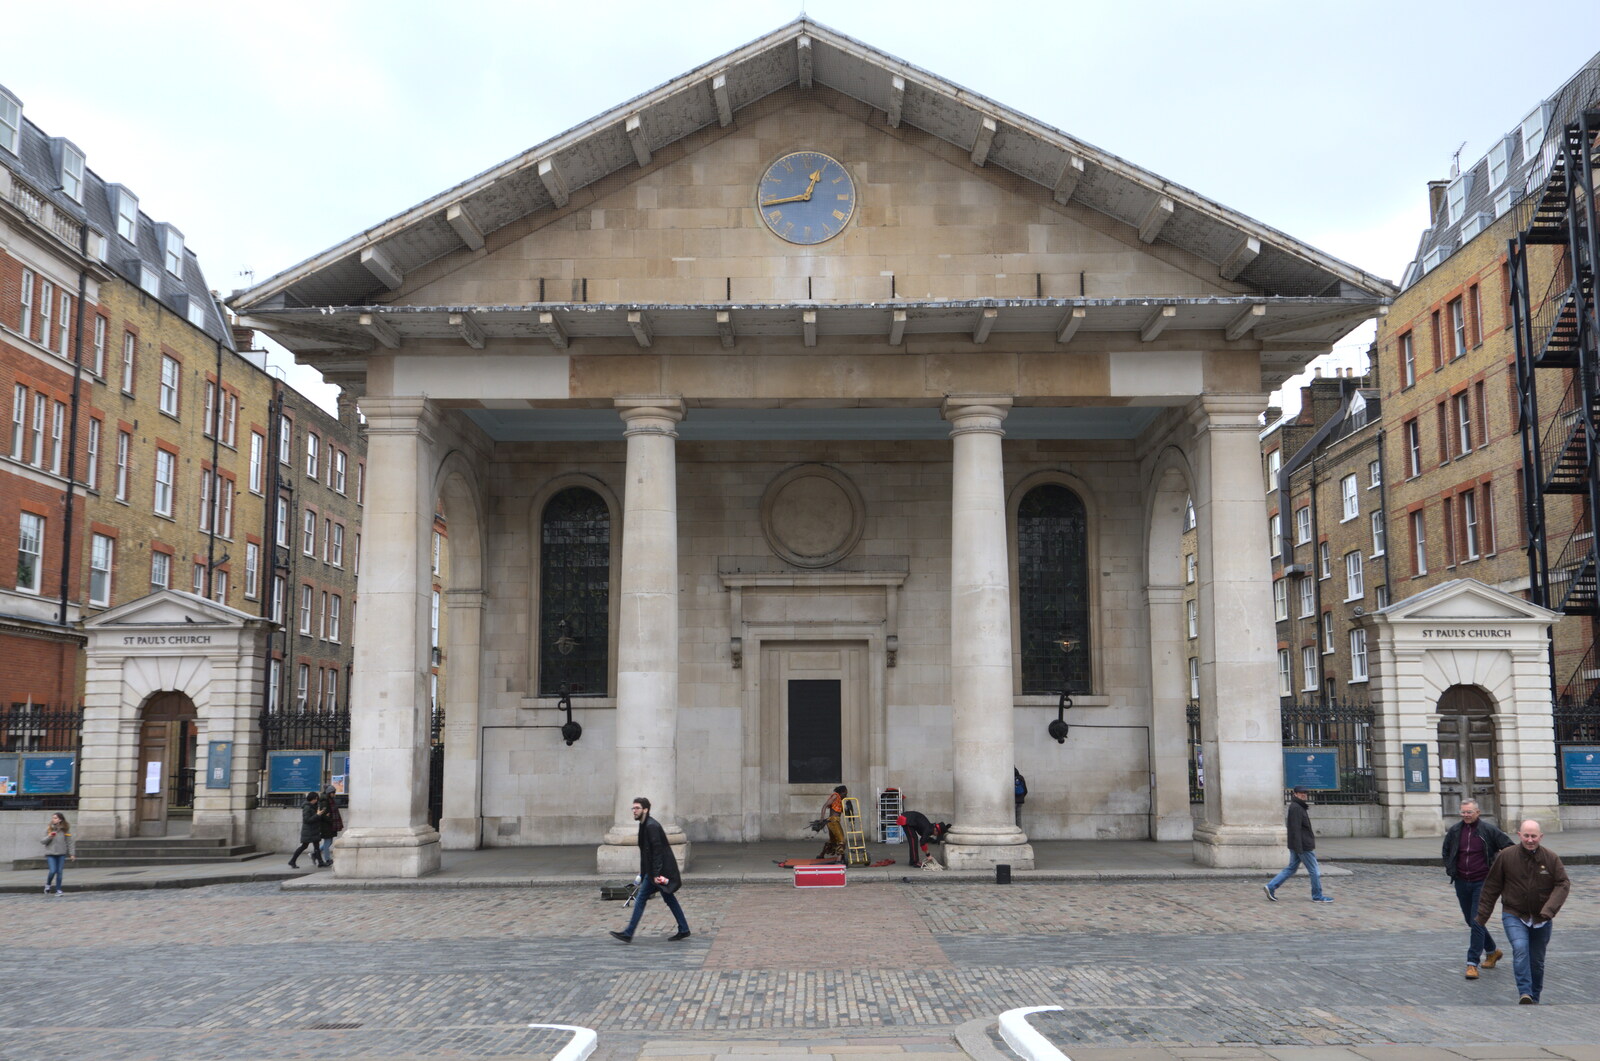 The front of St. Paul's church from A SwiftKey Memorial Service, Covent Garden, London  - 13th March 2020